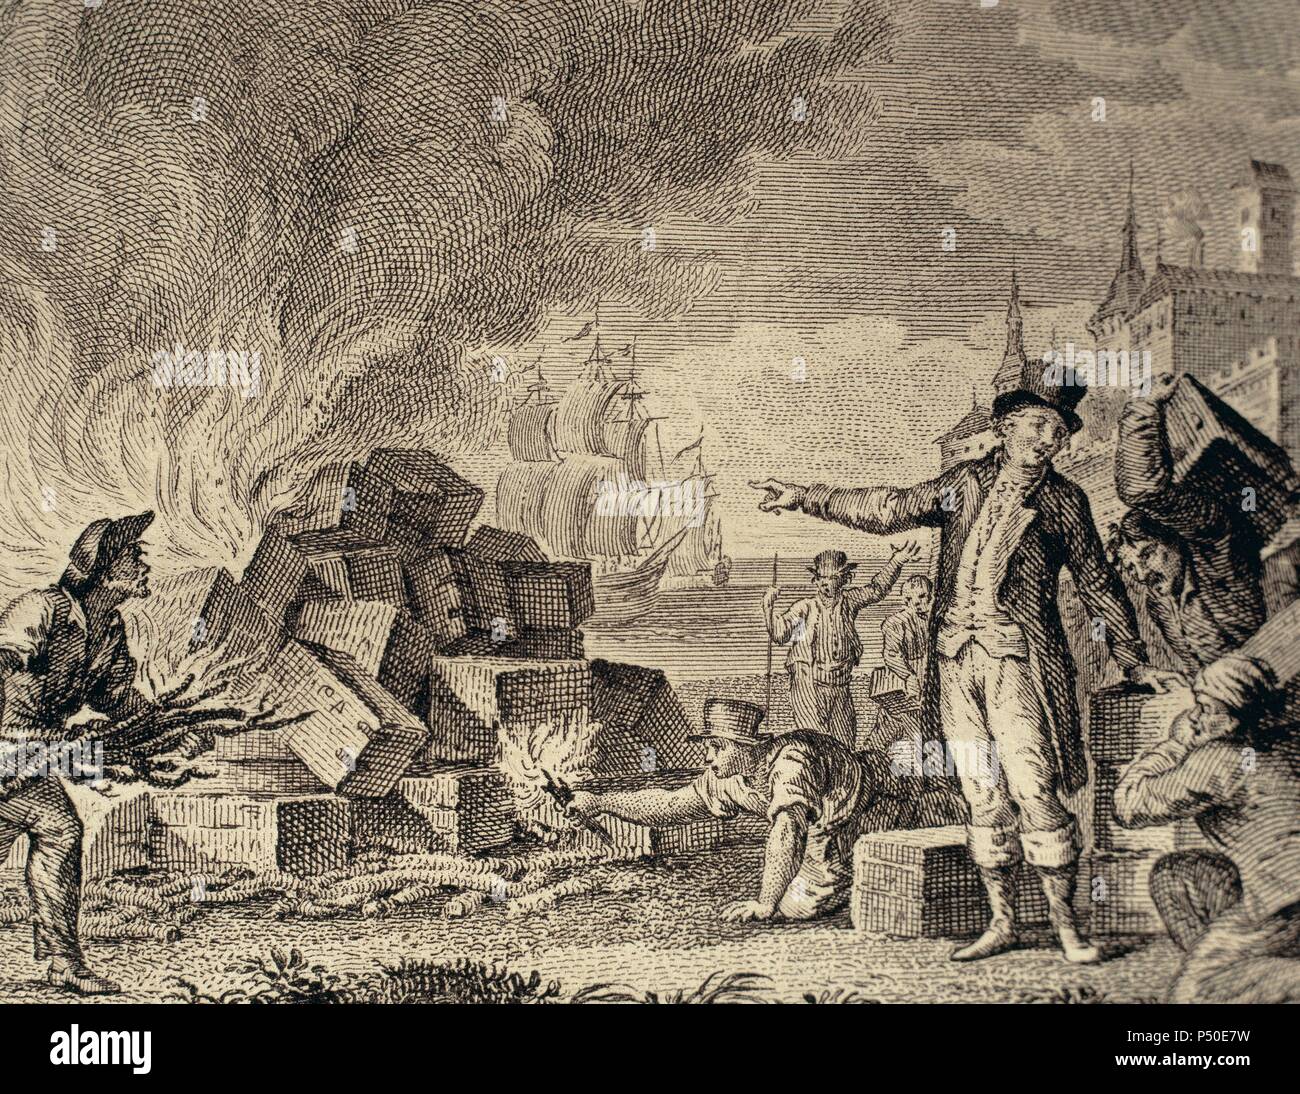 American War of Independence (1775-1783). Boston Tea Party. December 16, 1773. Revolution of the American colonists against taxes imposed by the British Parliament on tea. Disguised as Indians, boarded British merchant ships and dumped overboard crates of tea at the Boston Harbour. Engraving, 1807. Stock Photo